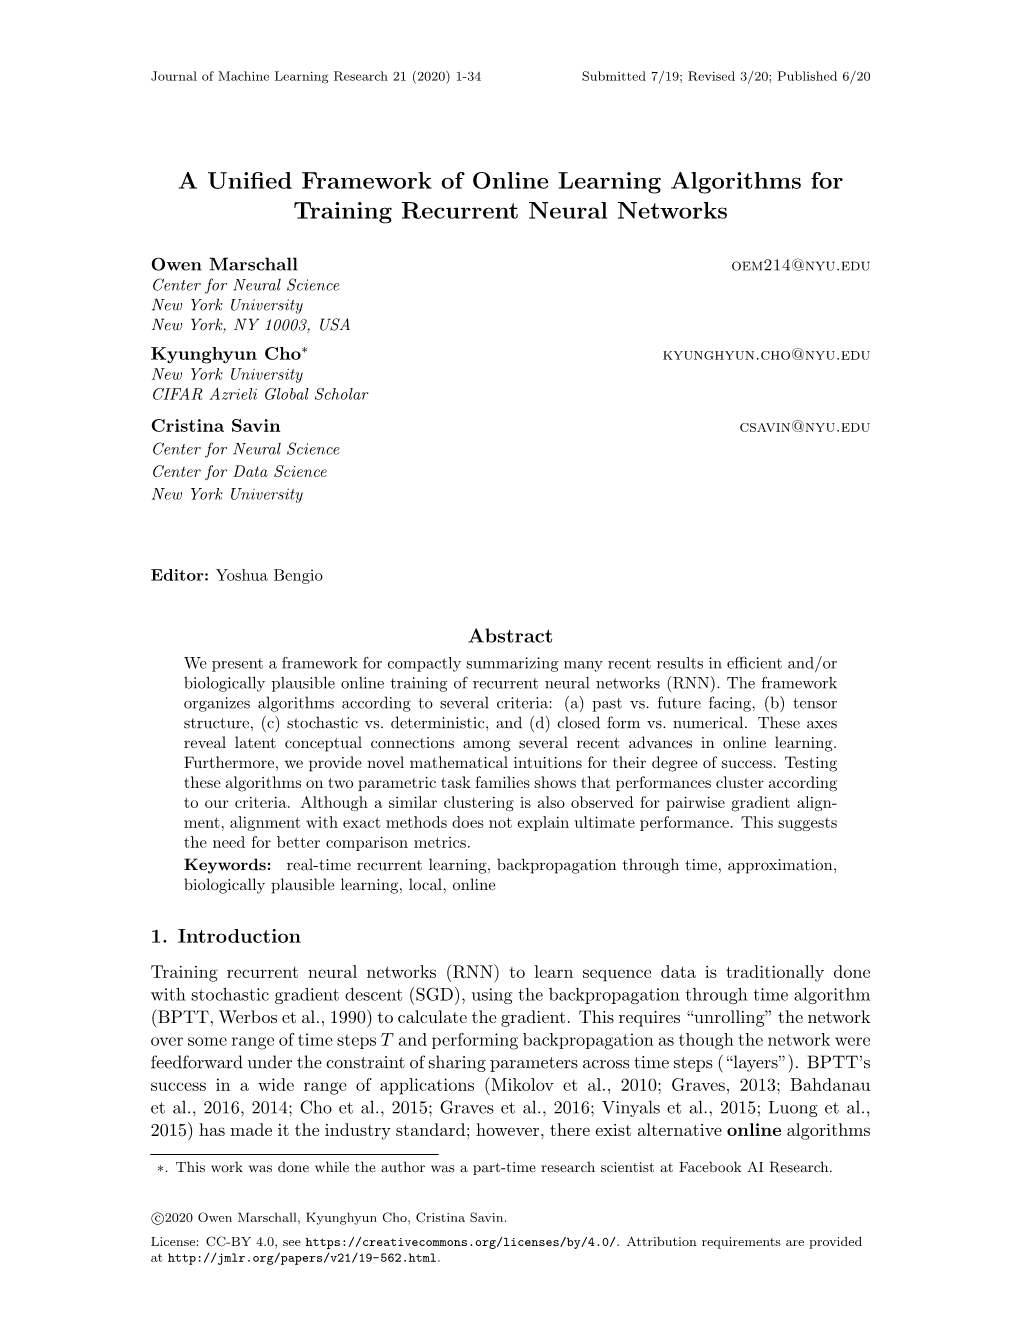 A Unified Framework of Online Learning Algorithms for Training